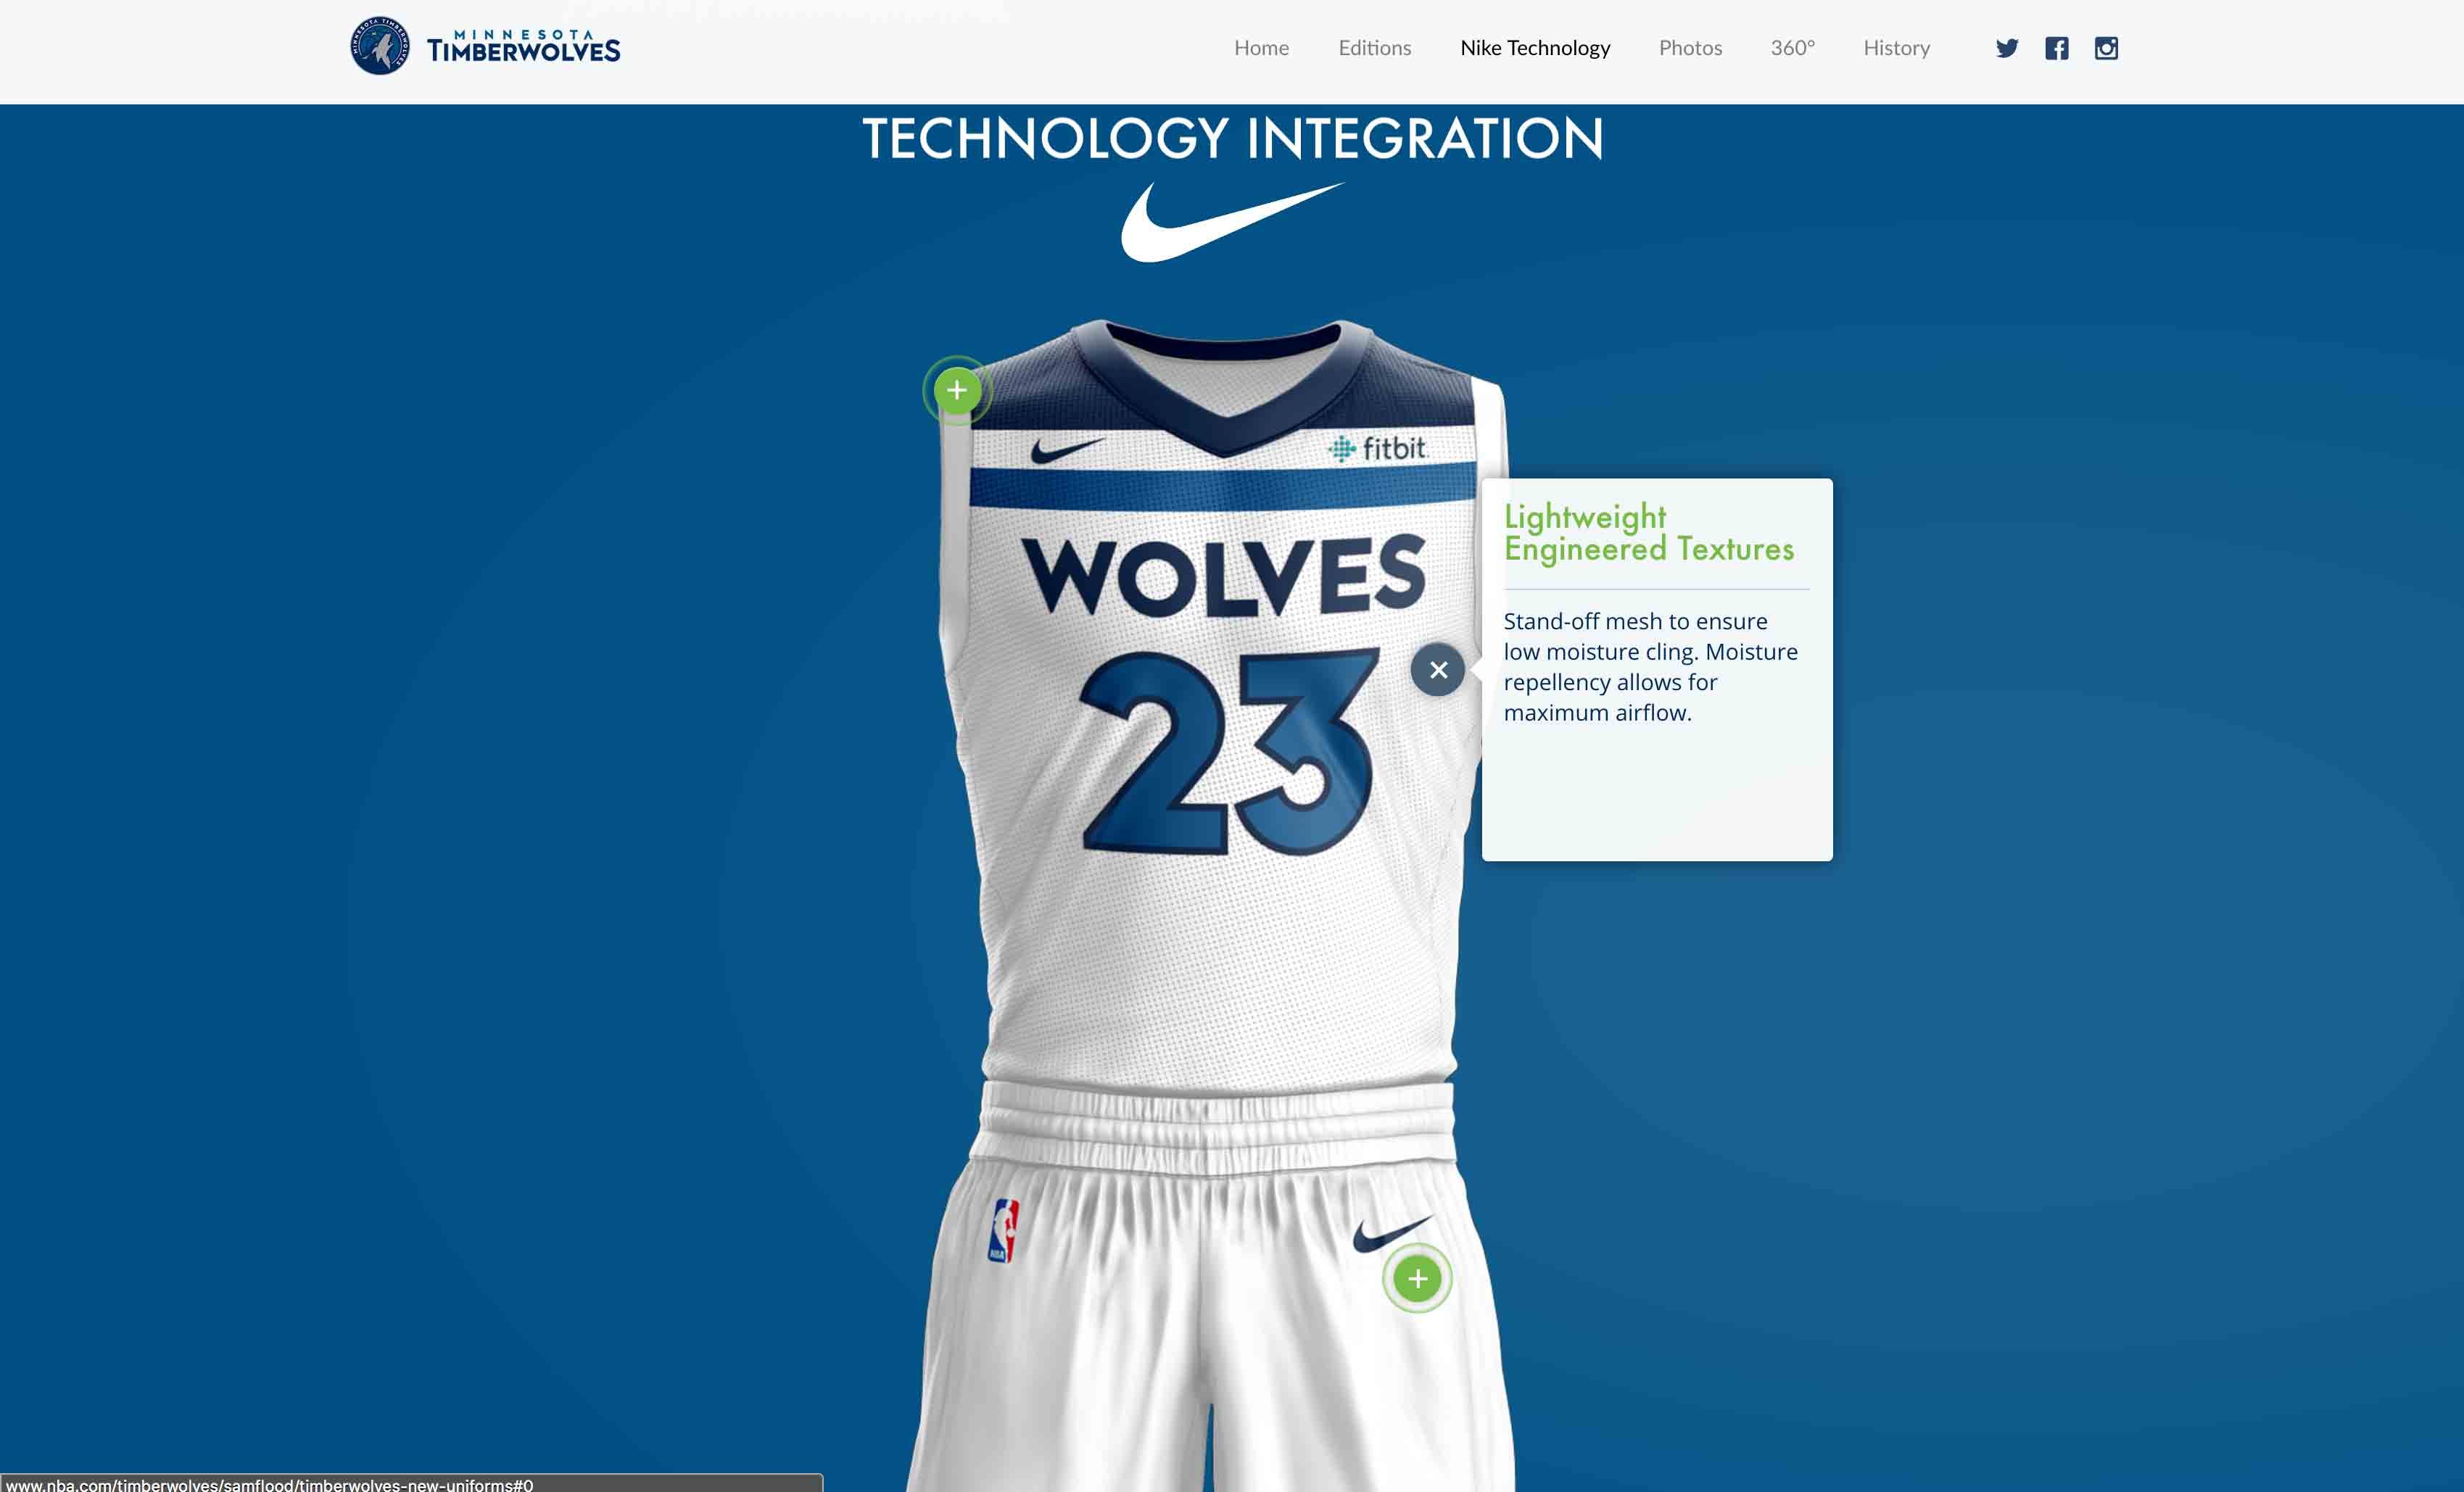 MN Timberwolves New Threads Project: Desktop View, Nike Technology Interactive Section